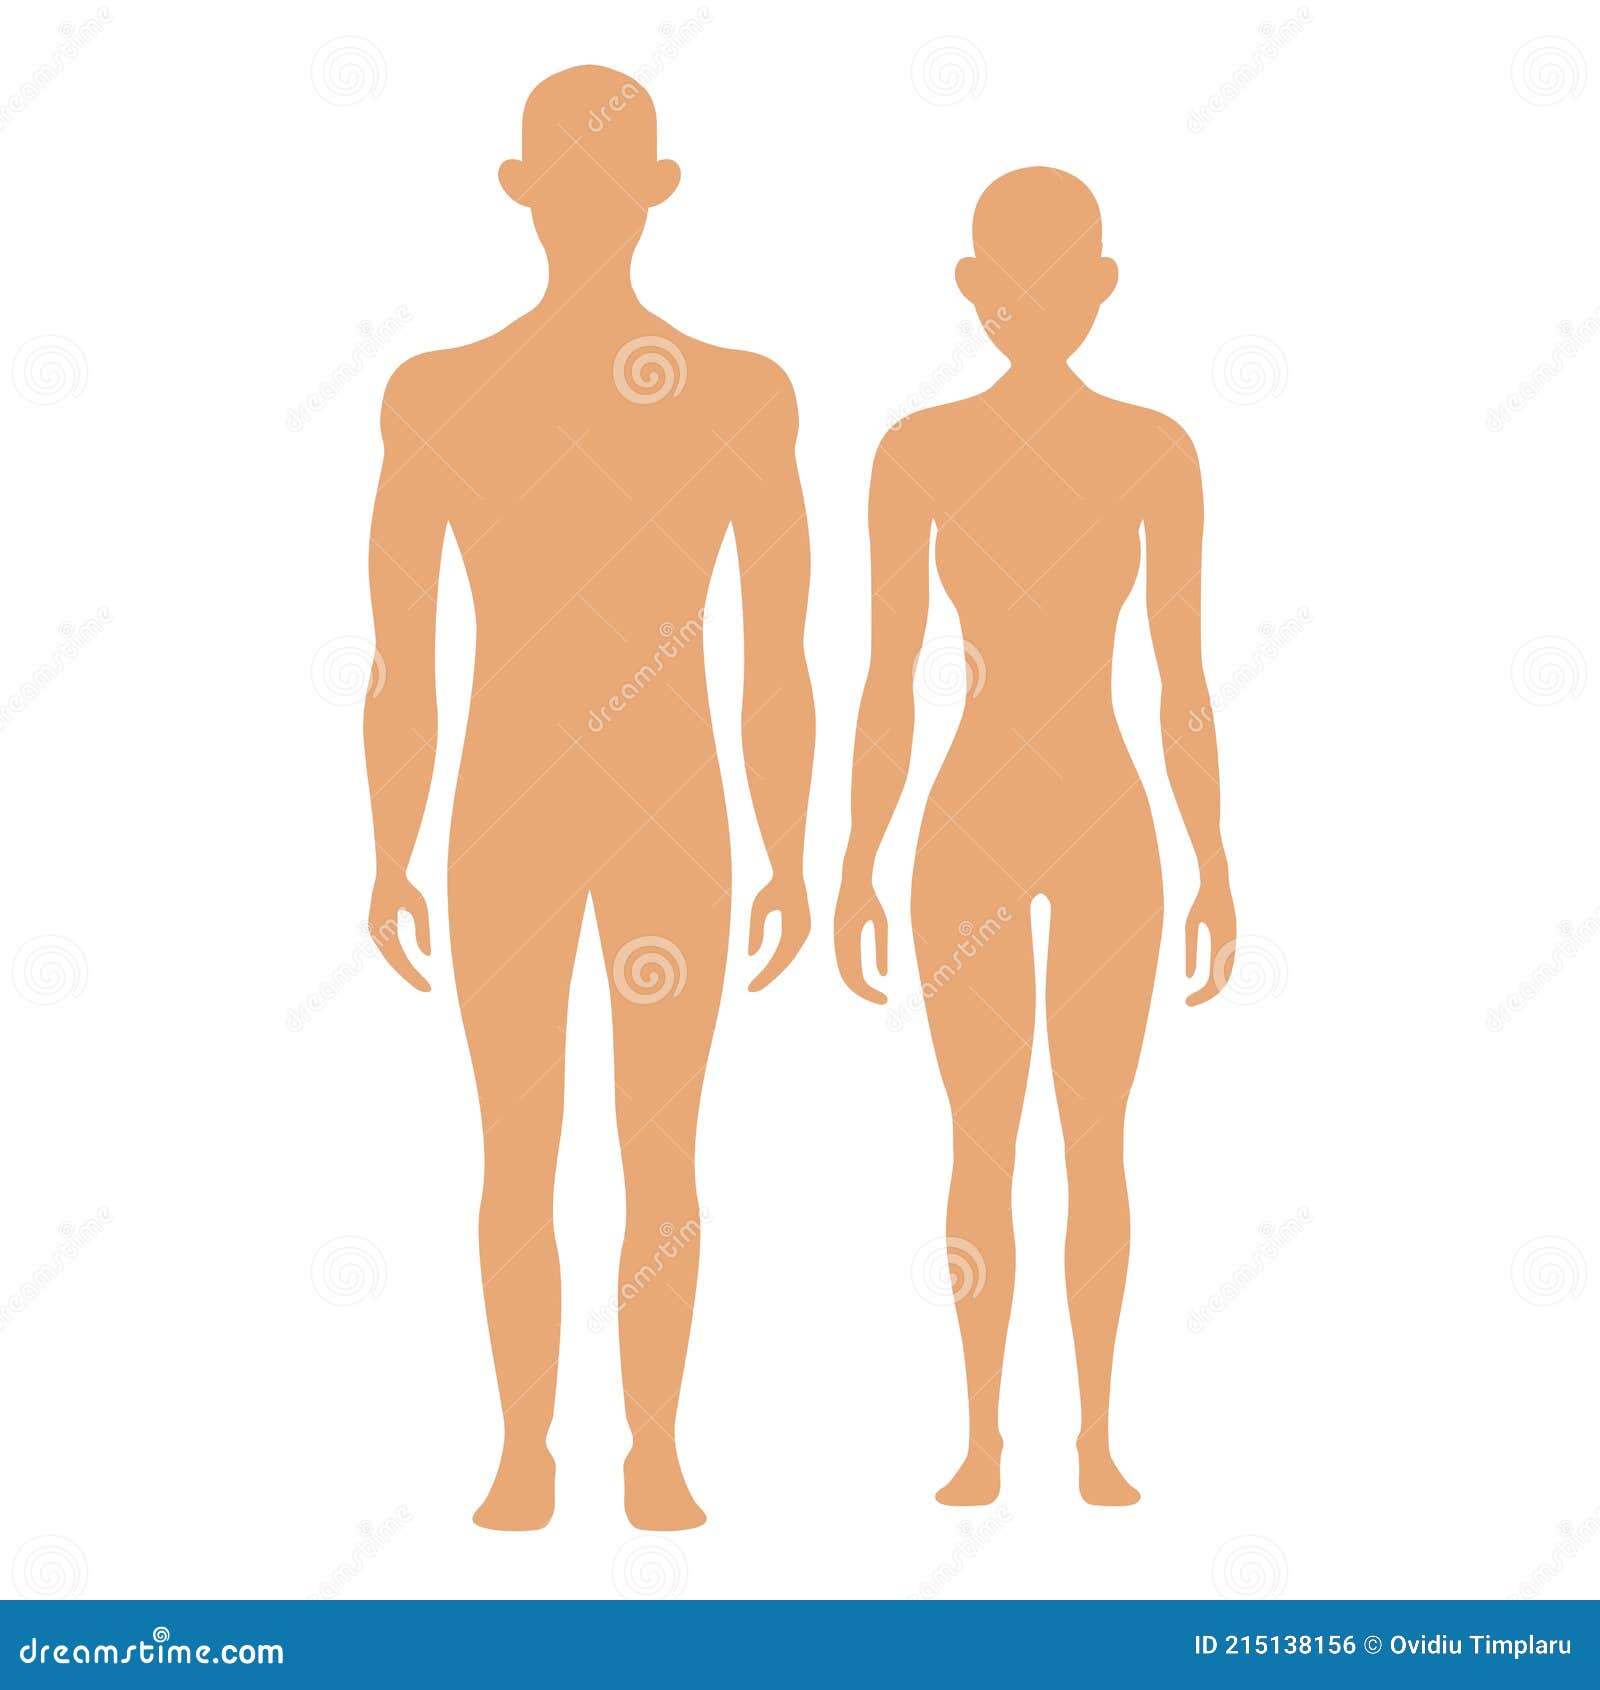 Back and front silhouettes of female human body. Anatomy. Medical